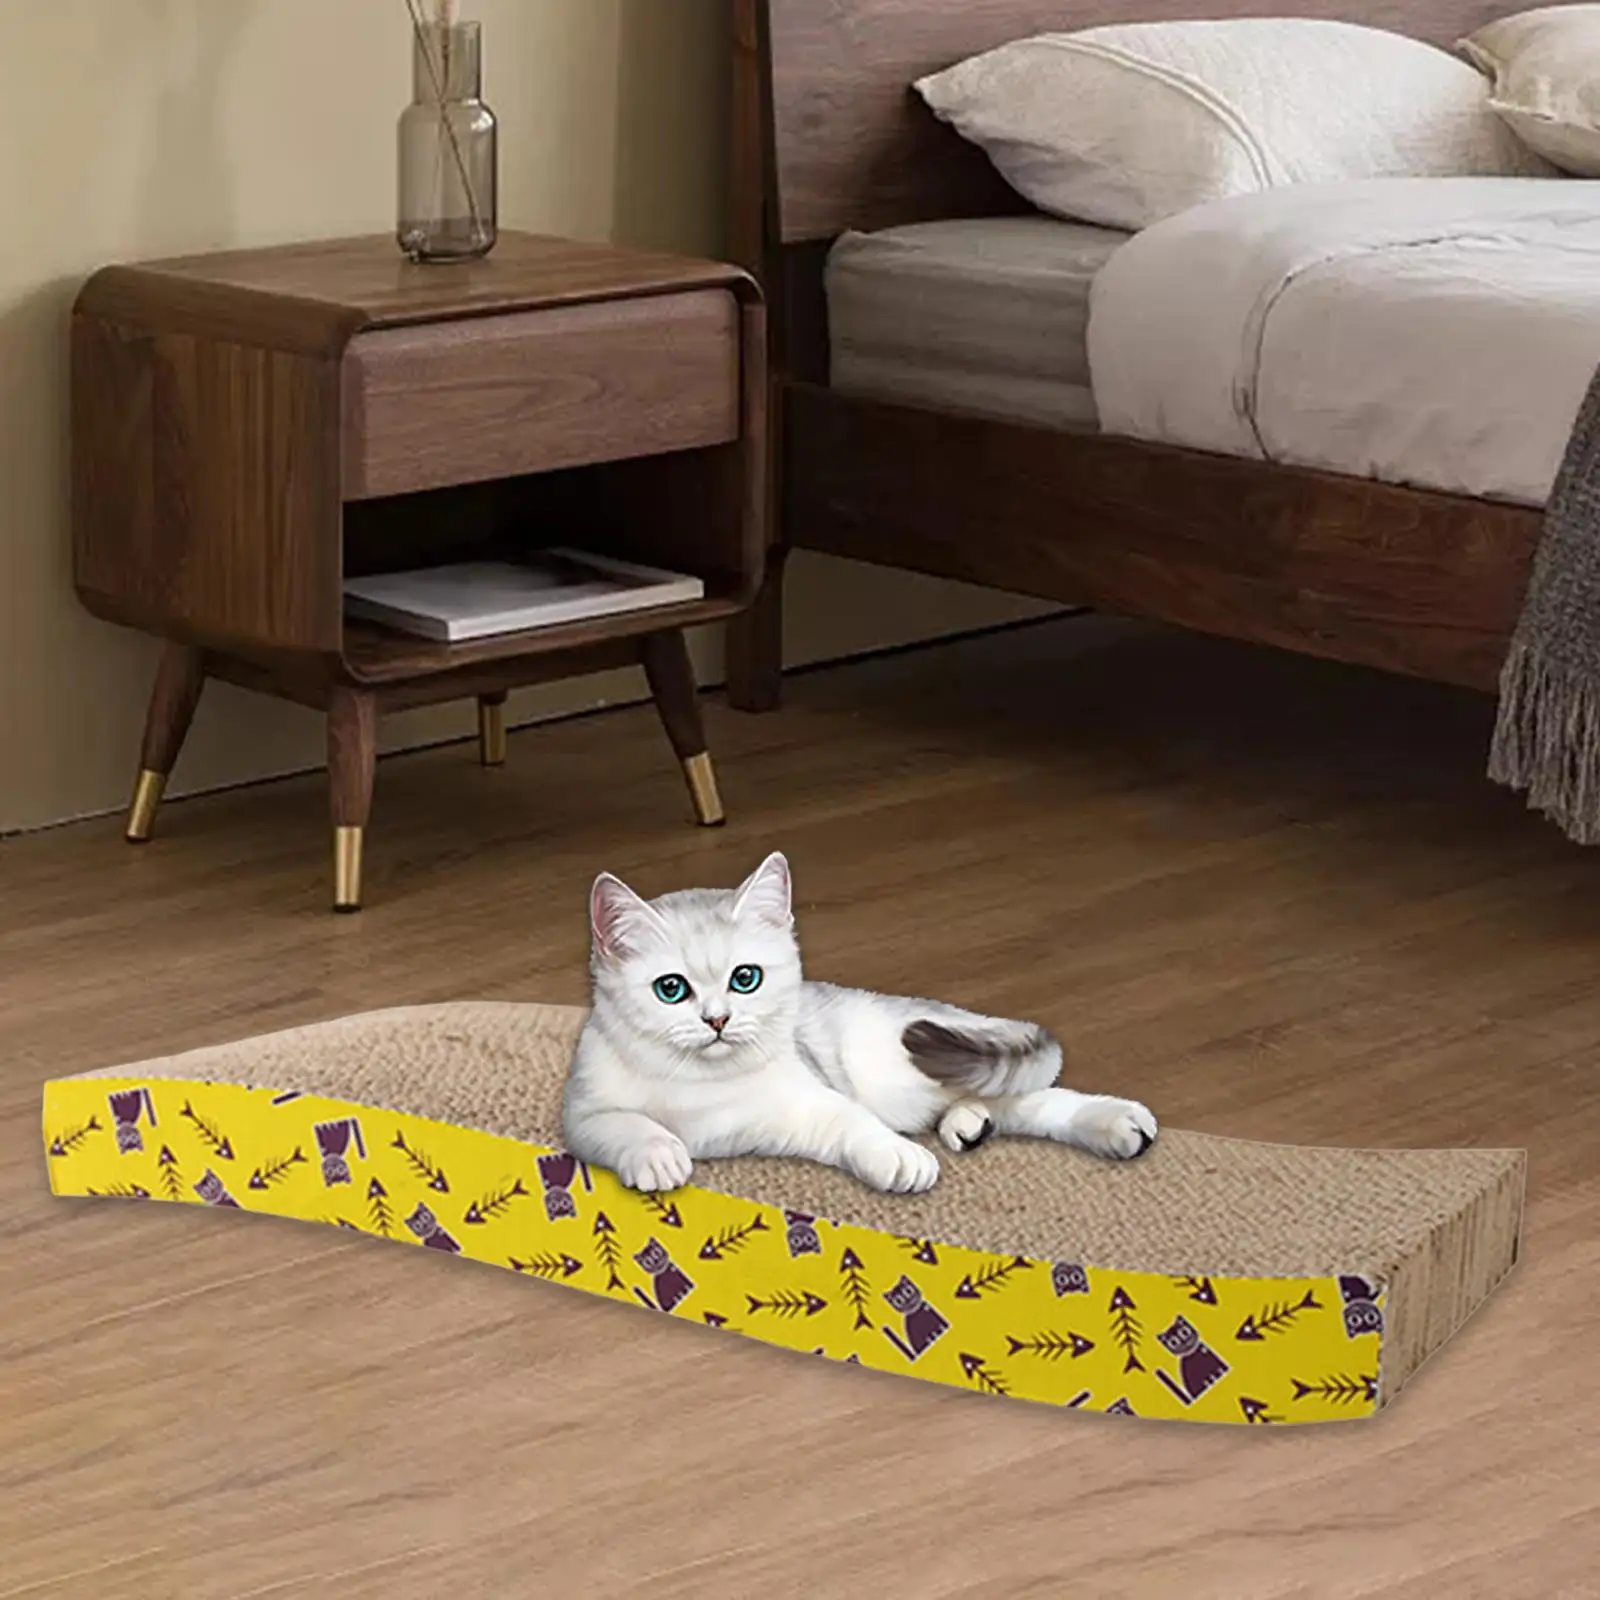 Scratching Lounge Bed Cat Scratchers Cardboard Cat Scratch Pad Nest Cat Scratching Board for Sleeping Small Medium Large Cats